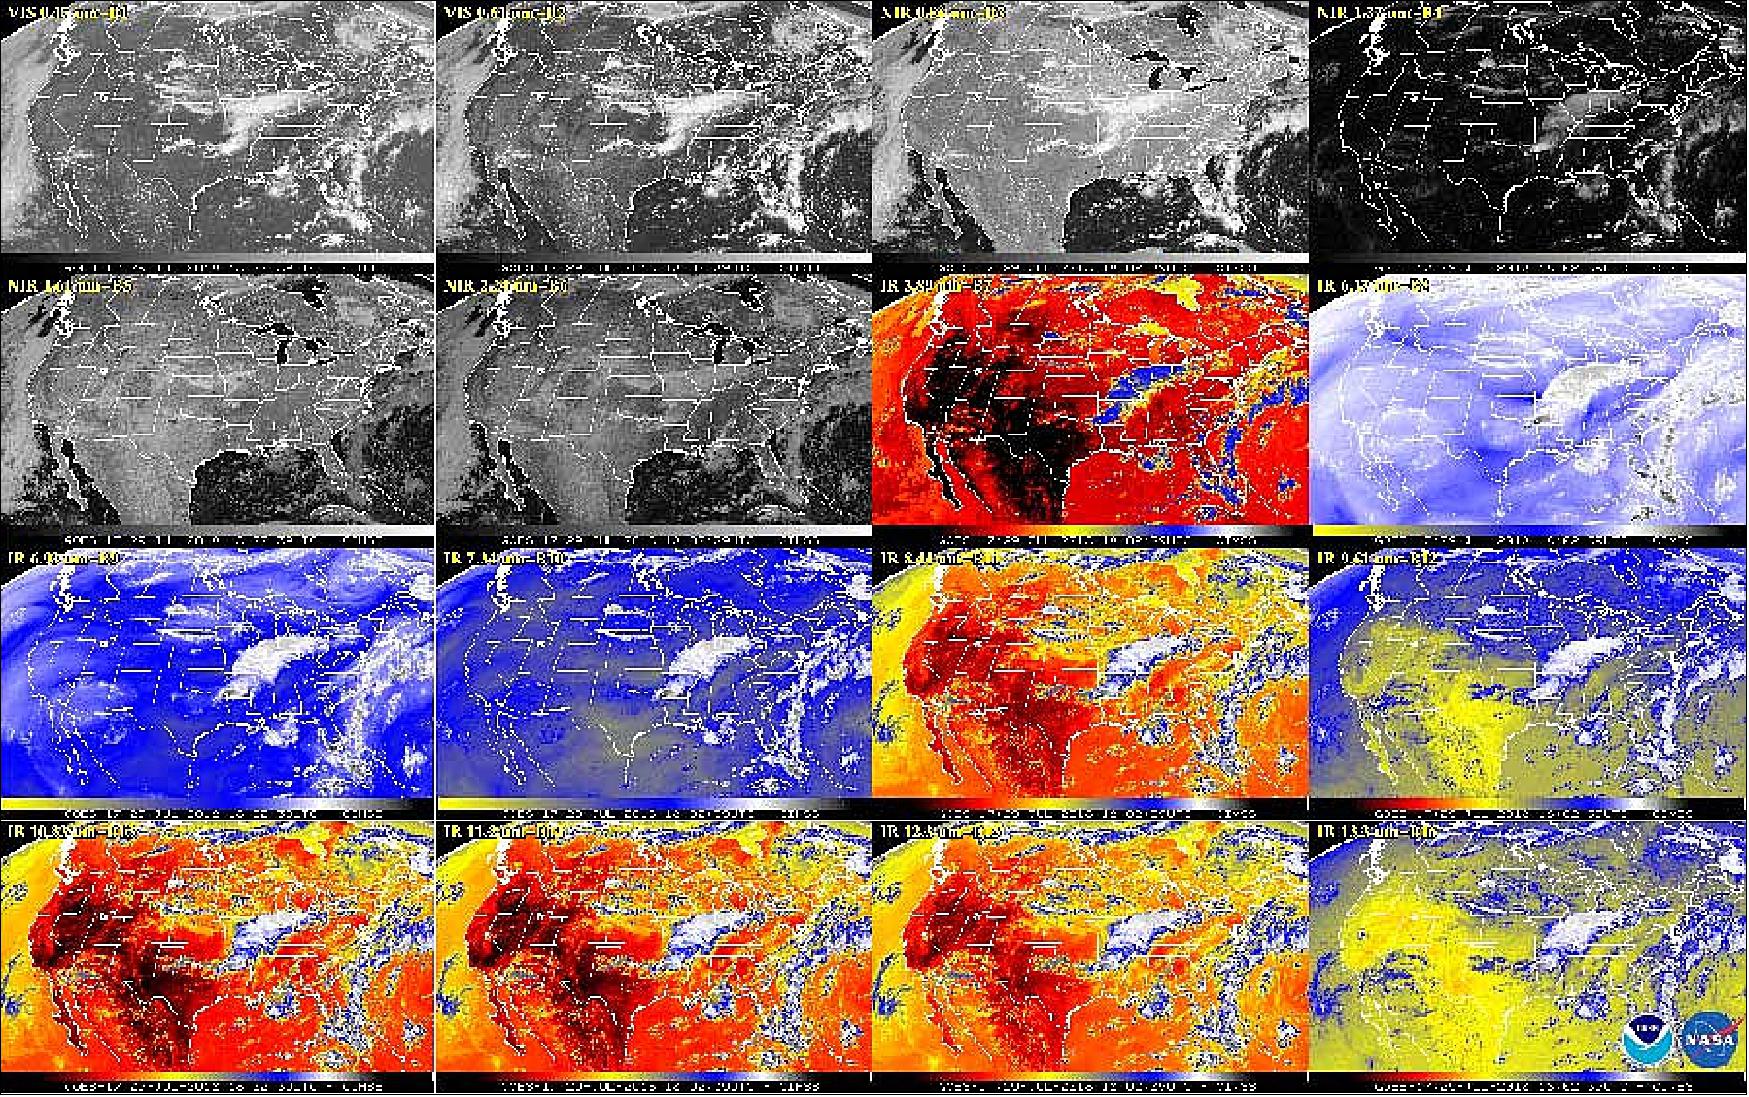 Figure 8: This 16-panel image shows a snapshot of the continental U.S. and surrounding oceans from each of the Advanced Baseline Imager channels at 2:02 p.m. EDT on July 29, 2018. This includes, from top left to bottom right, two visible channels, four near-infrared channels, and ten infrared channels. Each channel has a specific purpose in discerning meteorological and environmental features. A number of features can be seen in this image, including clouds over the mid-Mississippi region and off both coasts, the warm land temperatures over the Western U.S., and atmospheric moisture. This imagery was captured between the instrument’s “cool” and “warm” season, when all 16 channels are available 24 hours per day. During the instrument’s “warm” seasons, varied data outages are expected for 9 of the channels during nighttime hours. The ABI’s increased channels provide three times more spectral information than the previous GOES imager (image credit: NOAA/NASA)